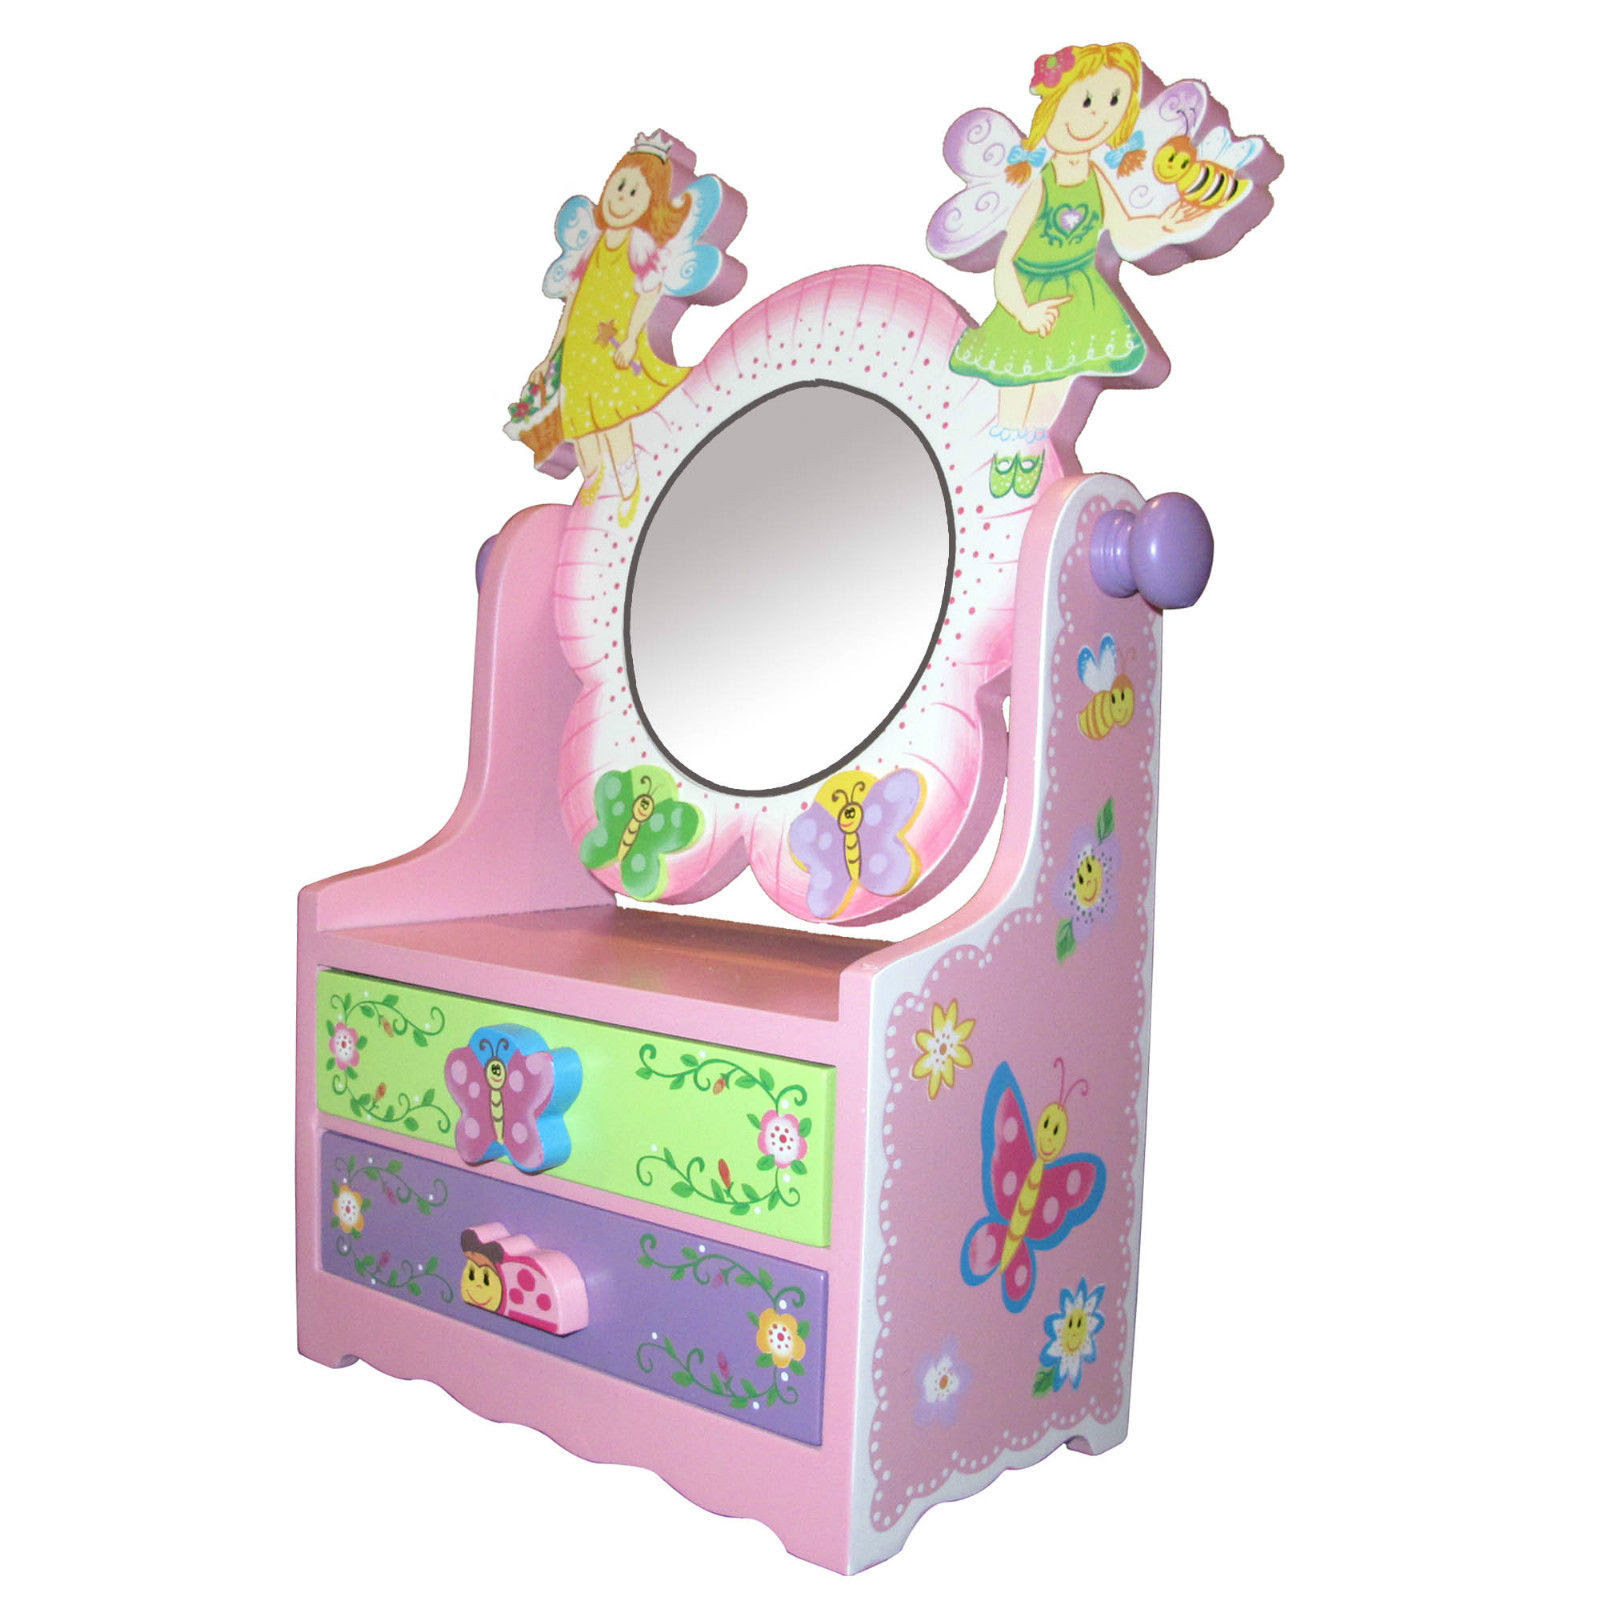 Lucy Locket Princess Kids Musical Jewellery Box Hot Pink Glittery Kids Musical Box with Ring Holder 